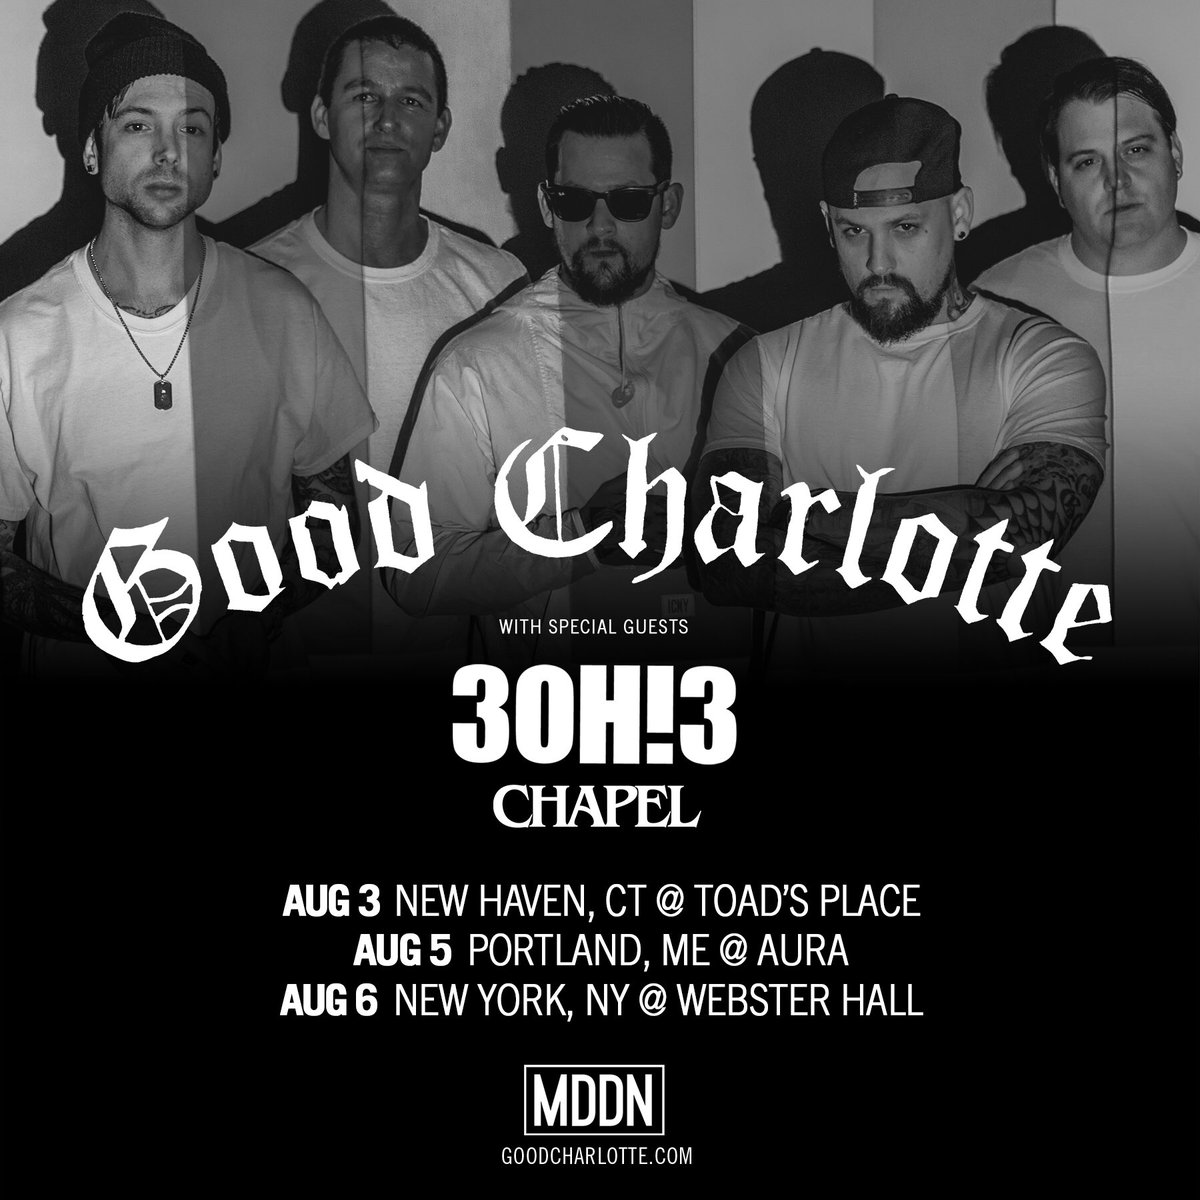 stoked to play with @3OH3 & @ChapelUSA! 
https://t.co/26JYhmtoUO https://t.co/HHzLYOJ0GN